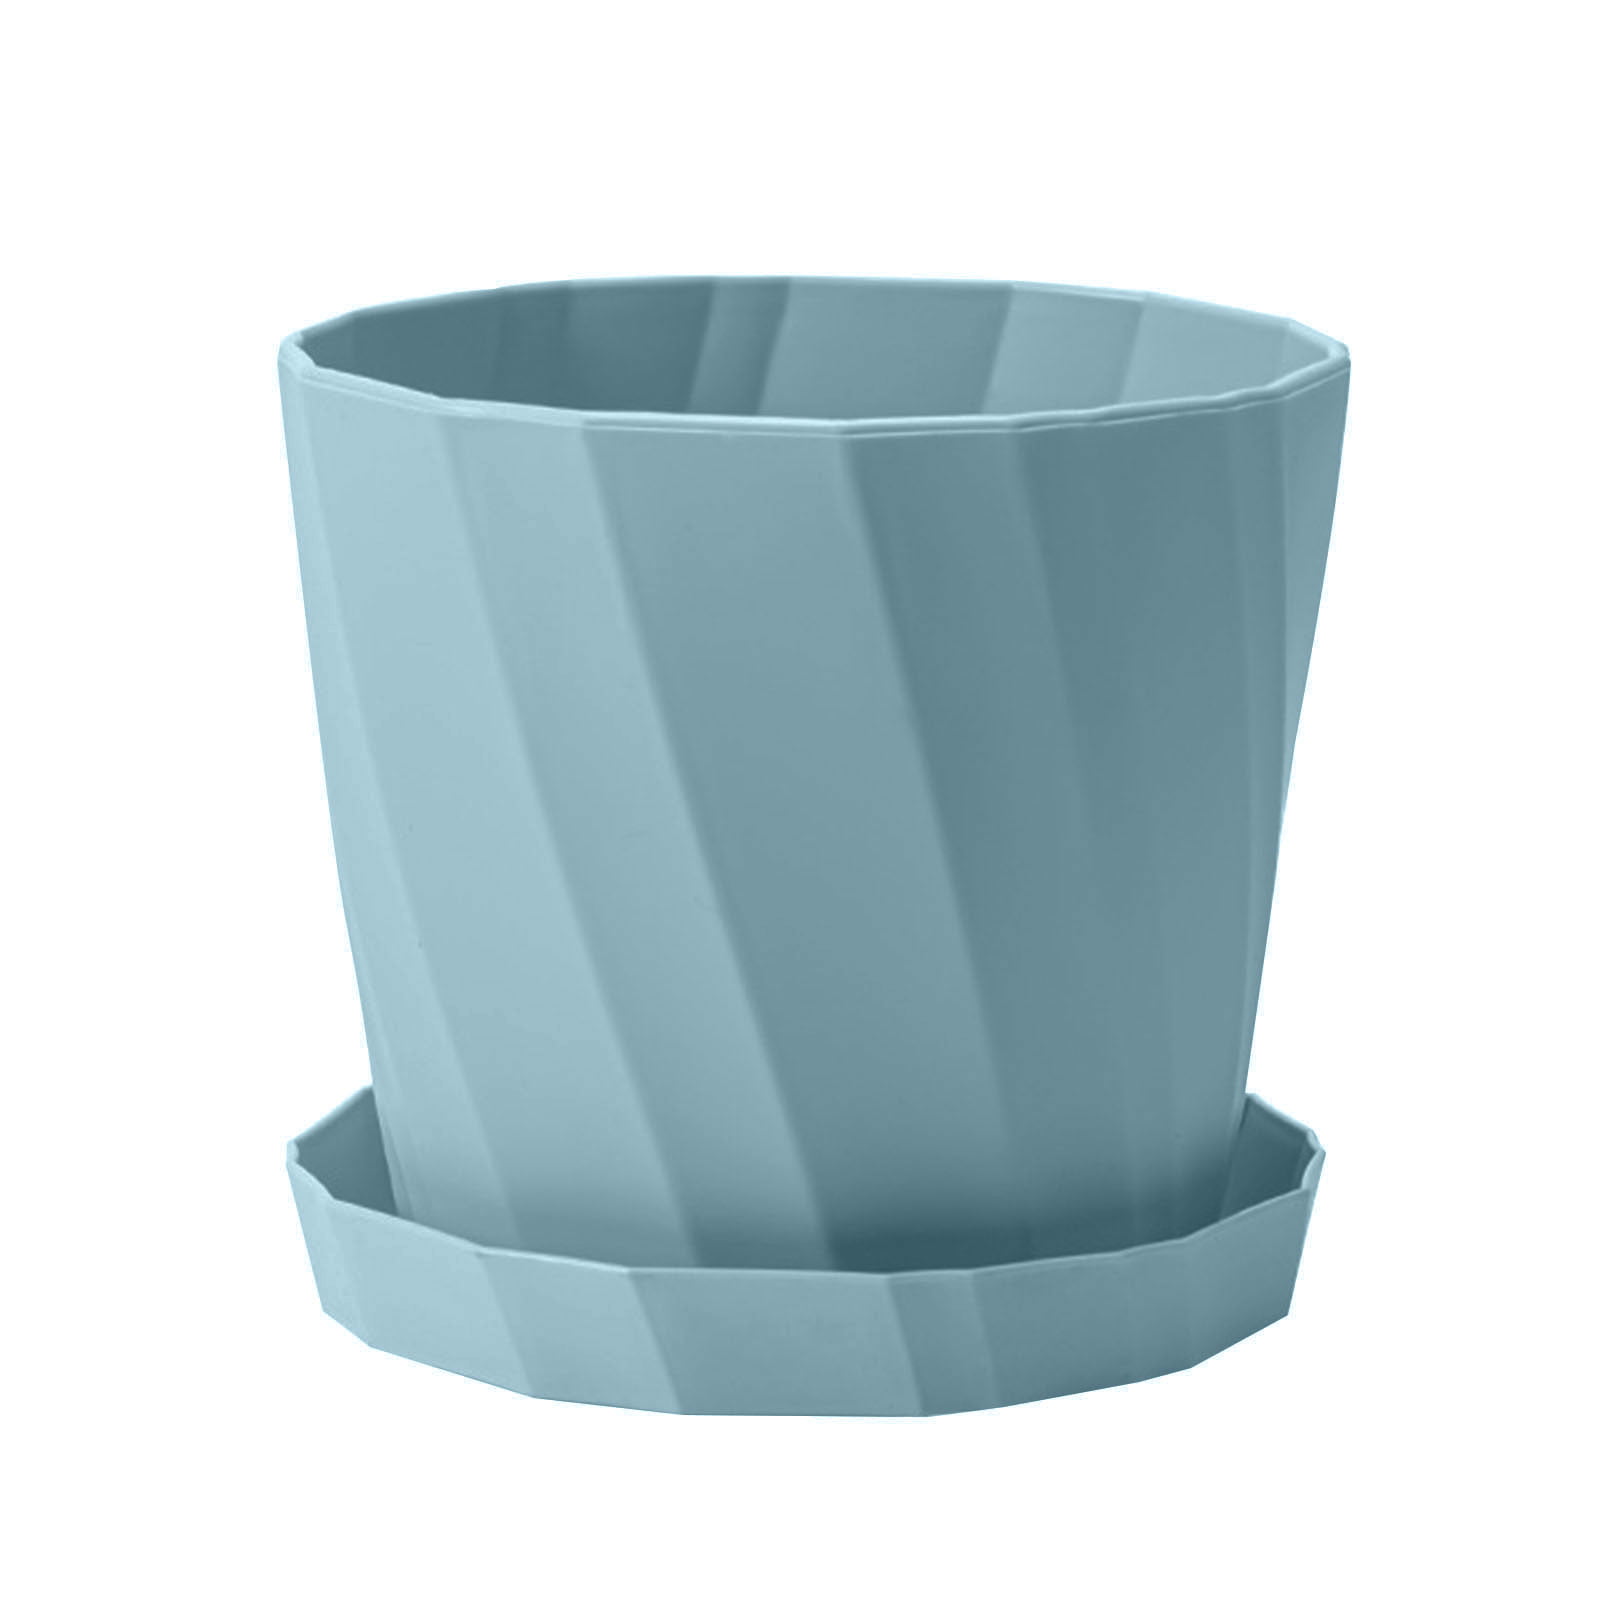 Details about   Elegant Solid Color Plastic Succulent Plant Flowerpot with TrayHome Cafe Gift 